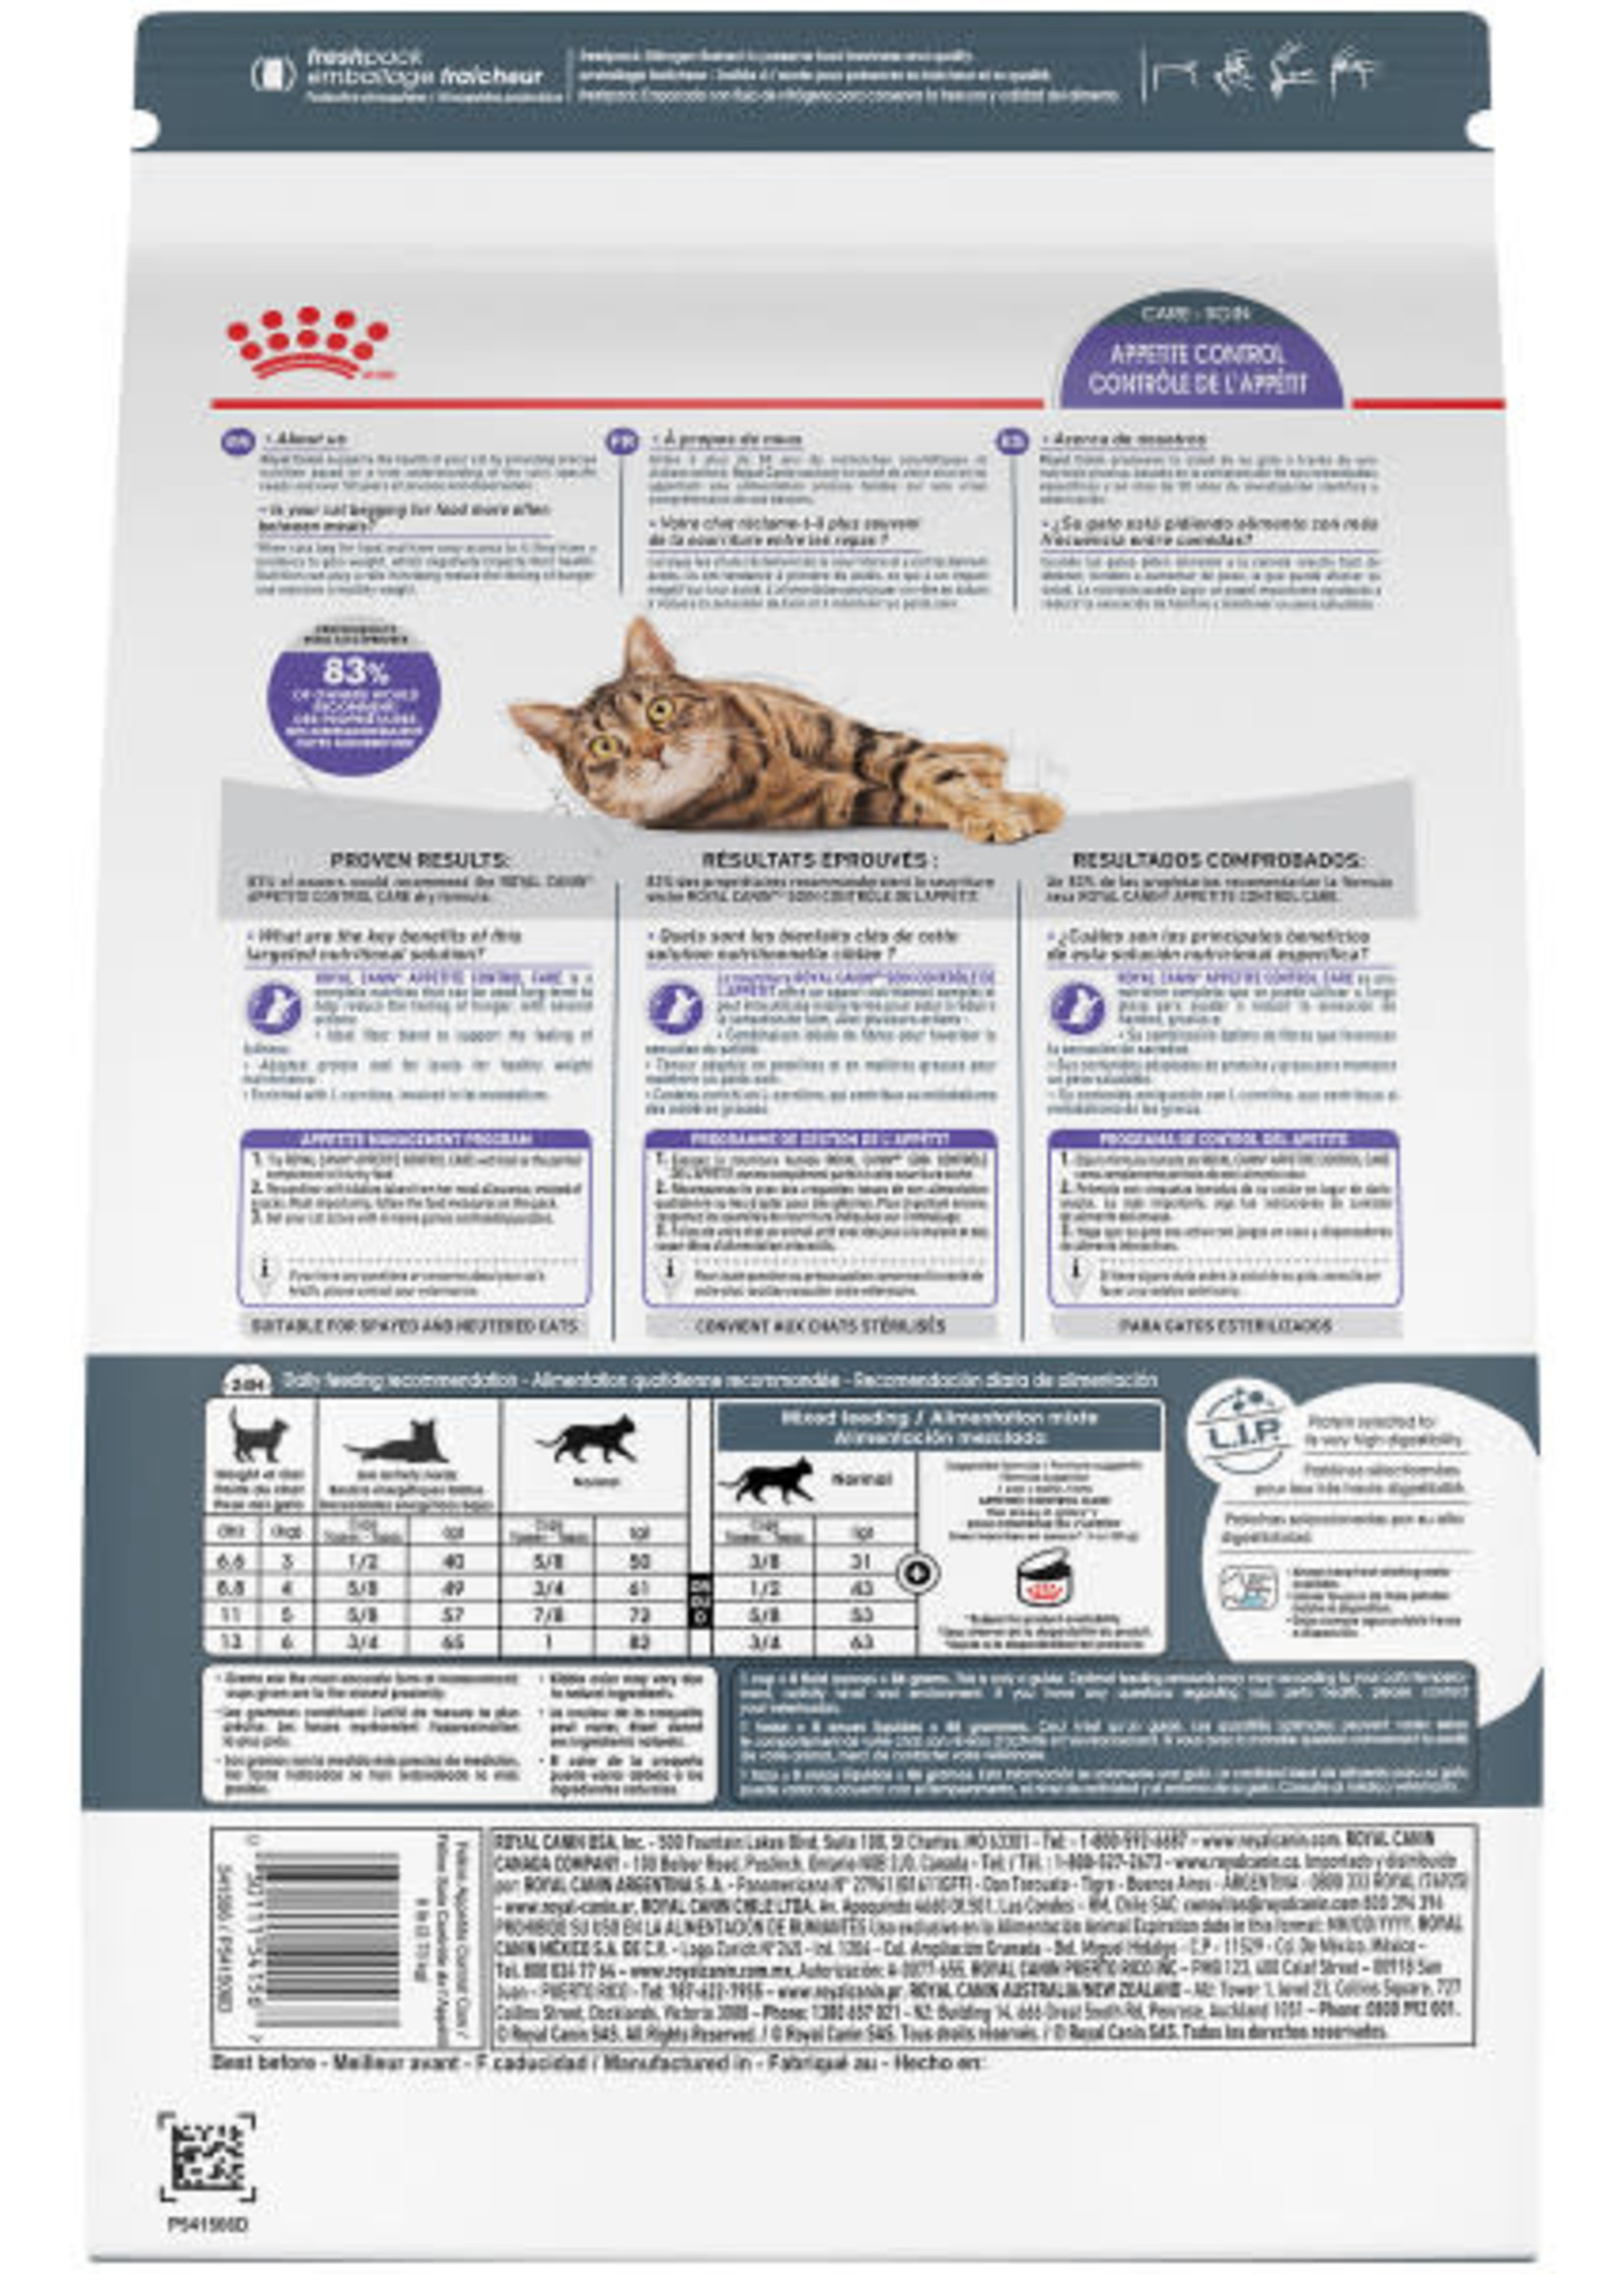 Royal Canin® Royal Canin Cat Appetite Control Spayed/Neutered 6lb